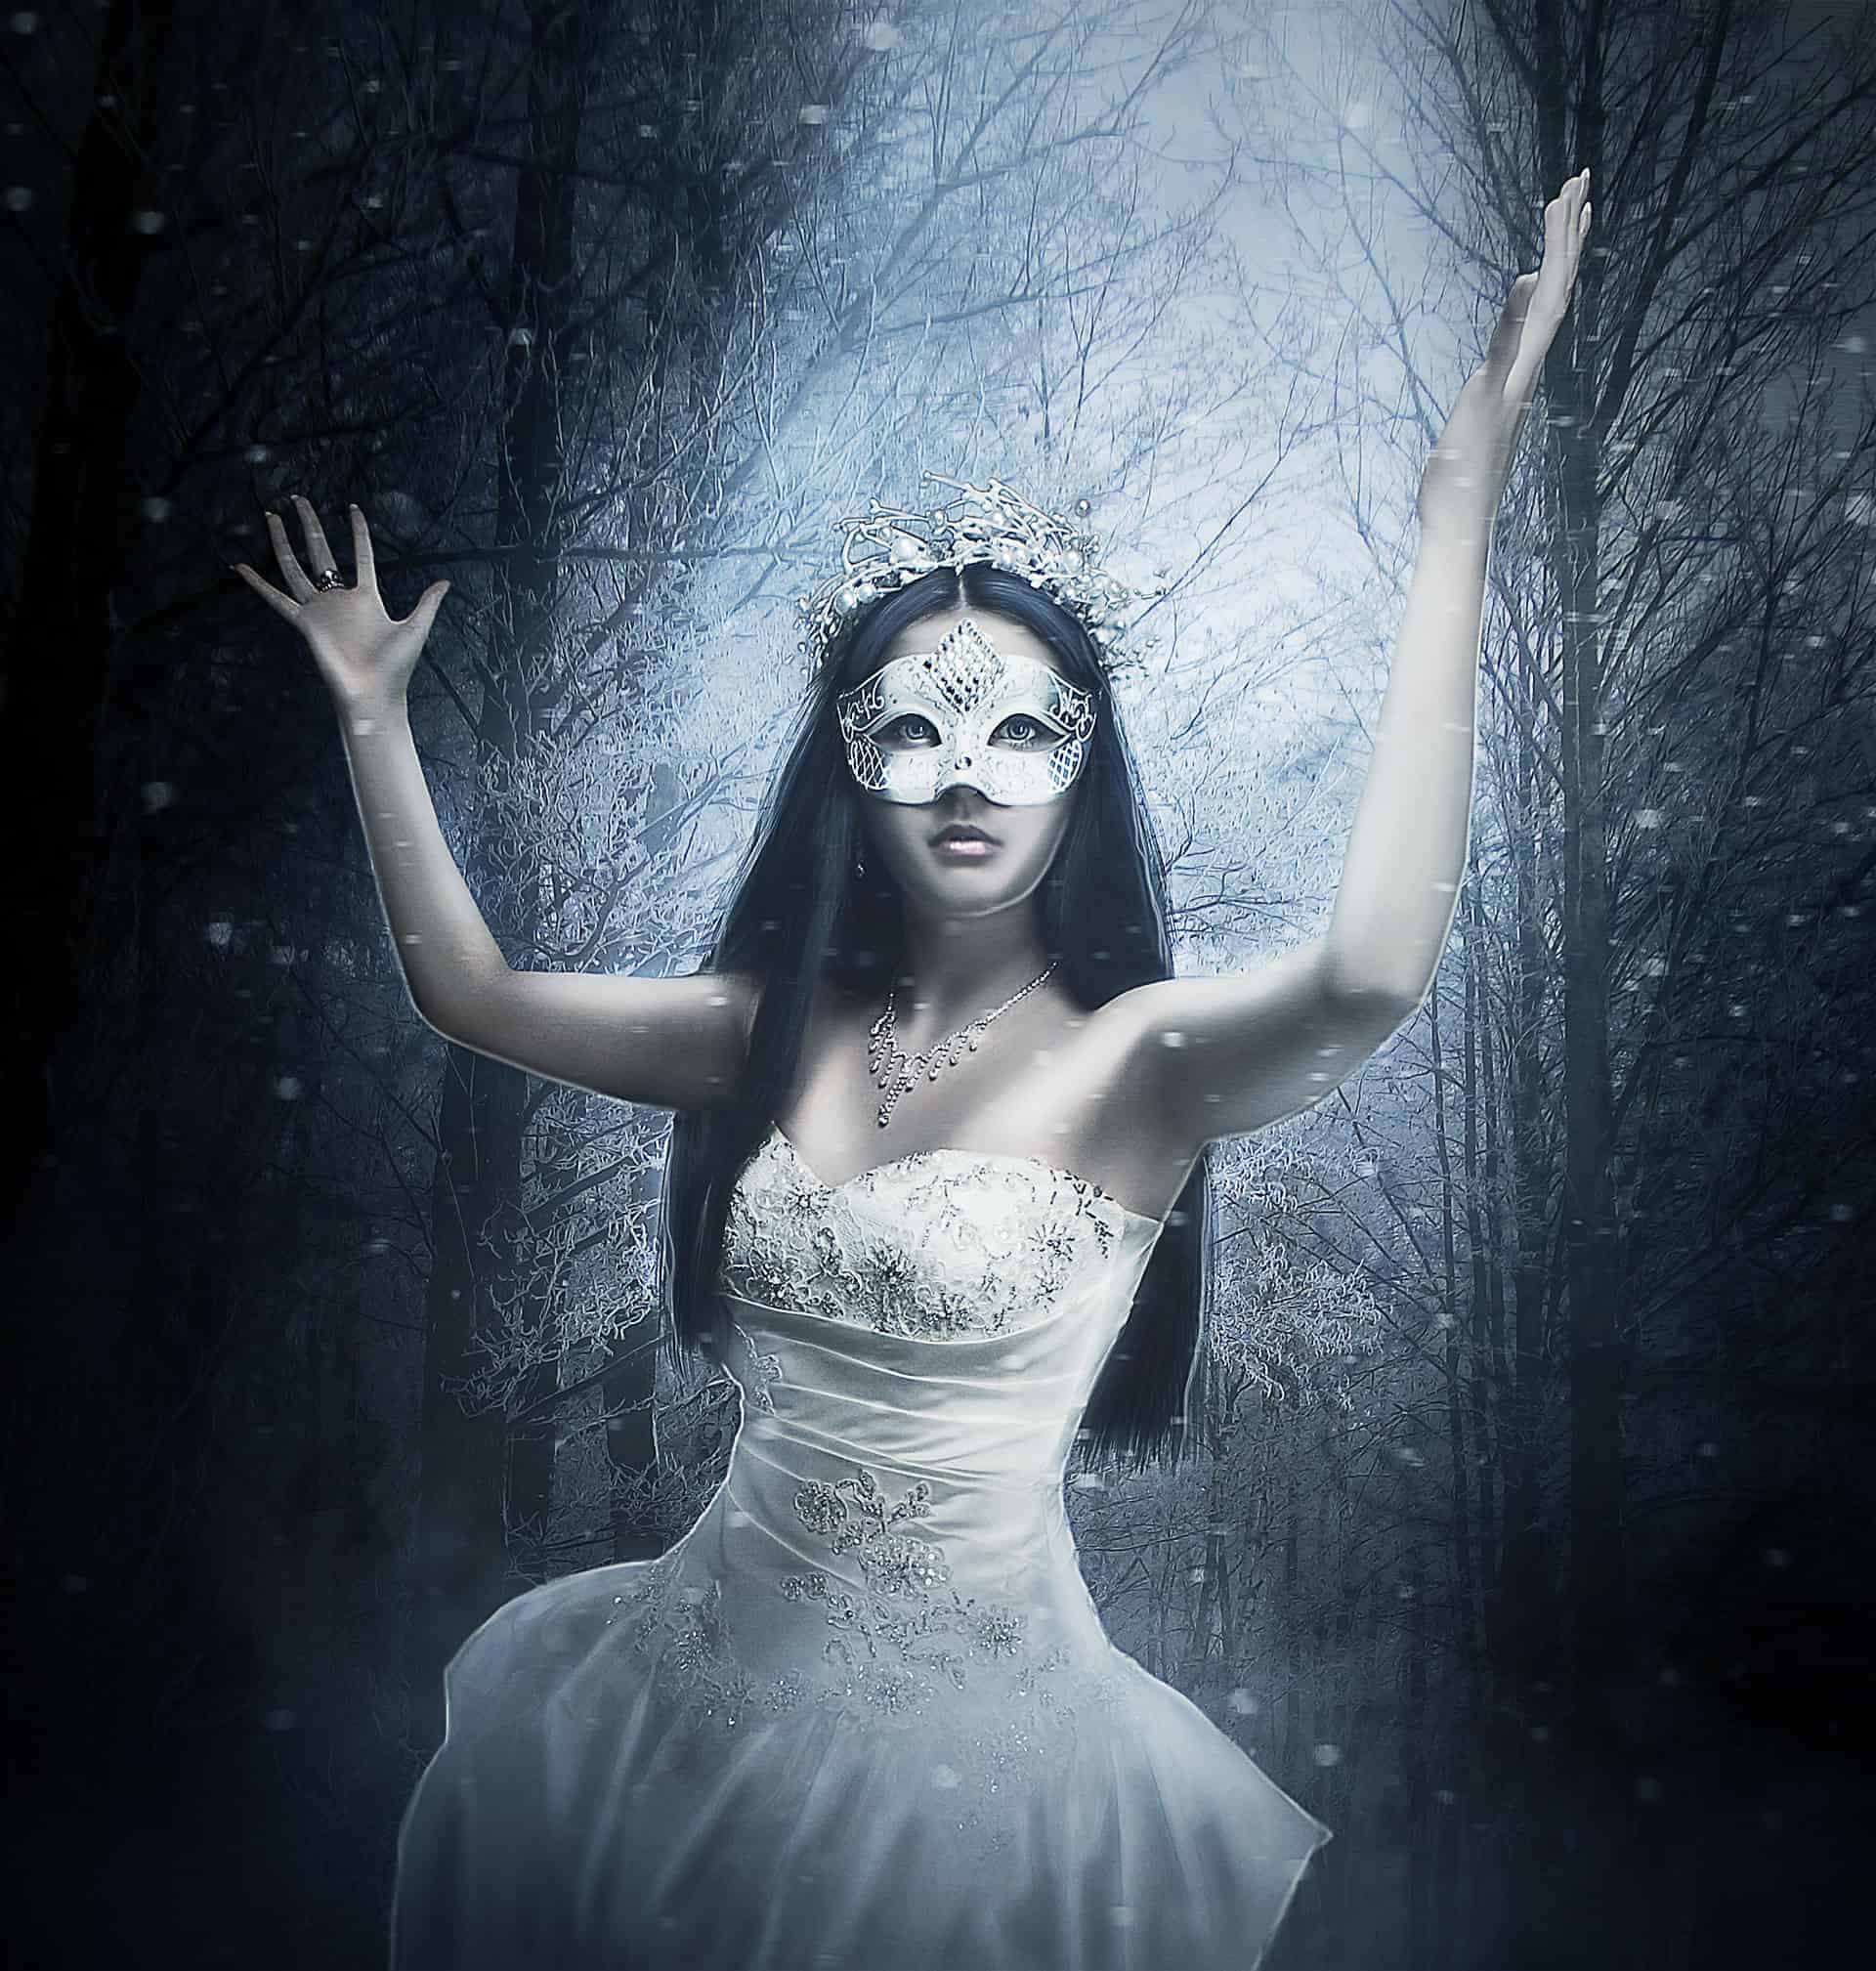 How to Create a Stunning Winter Princess Artwork in Photoshop